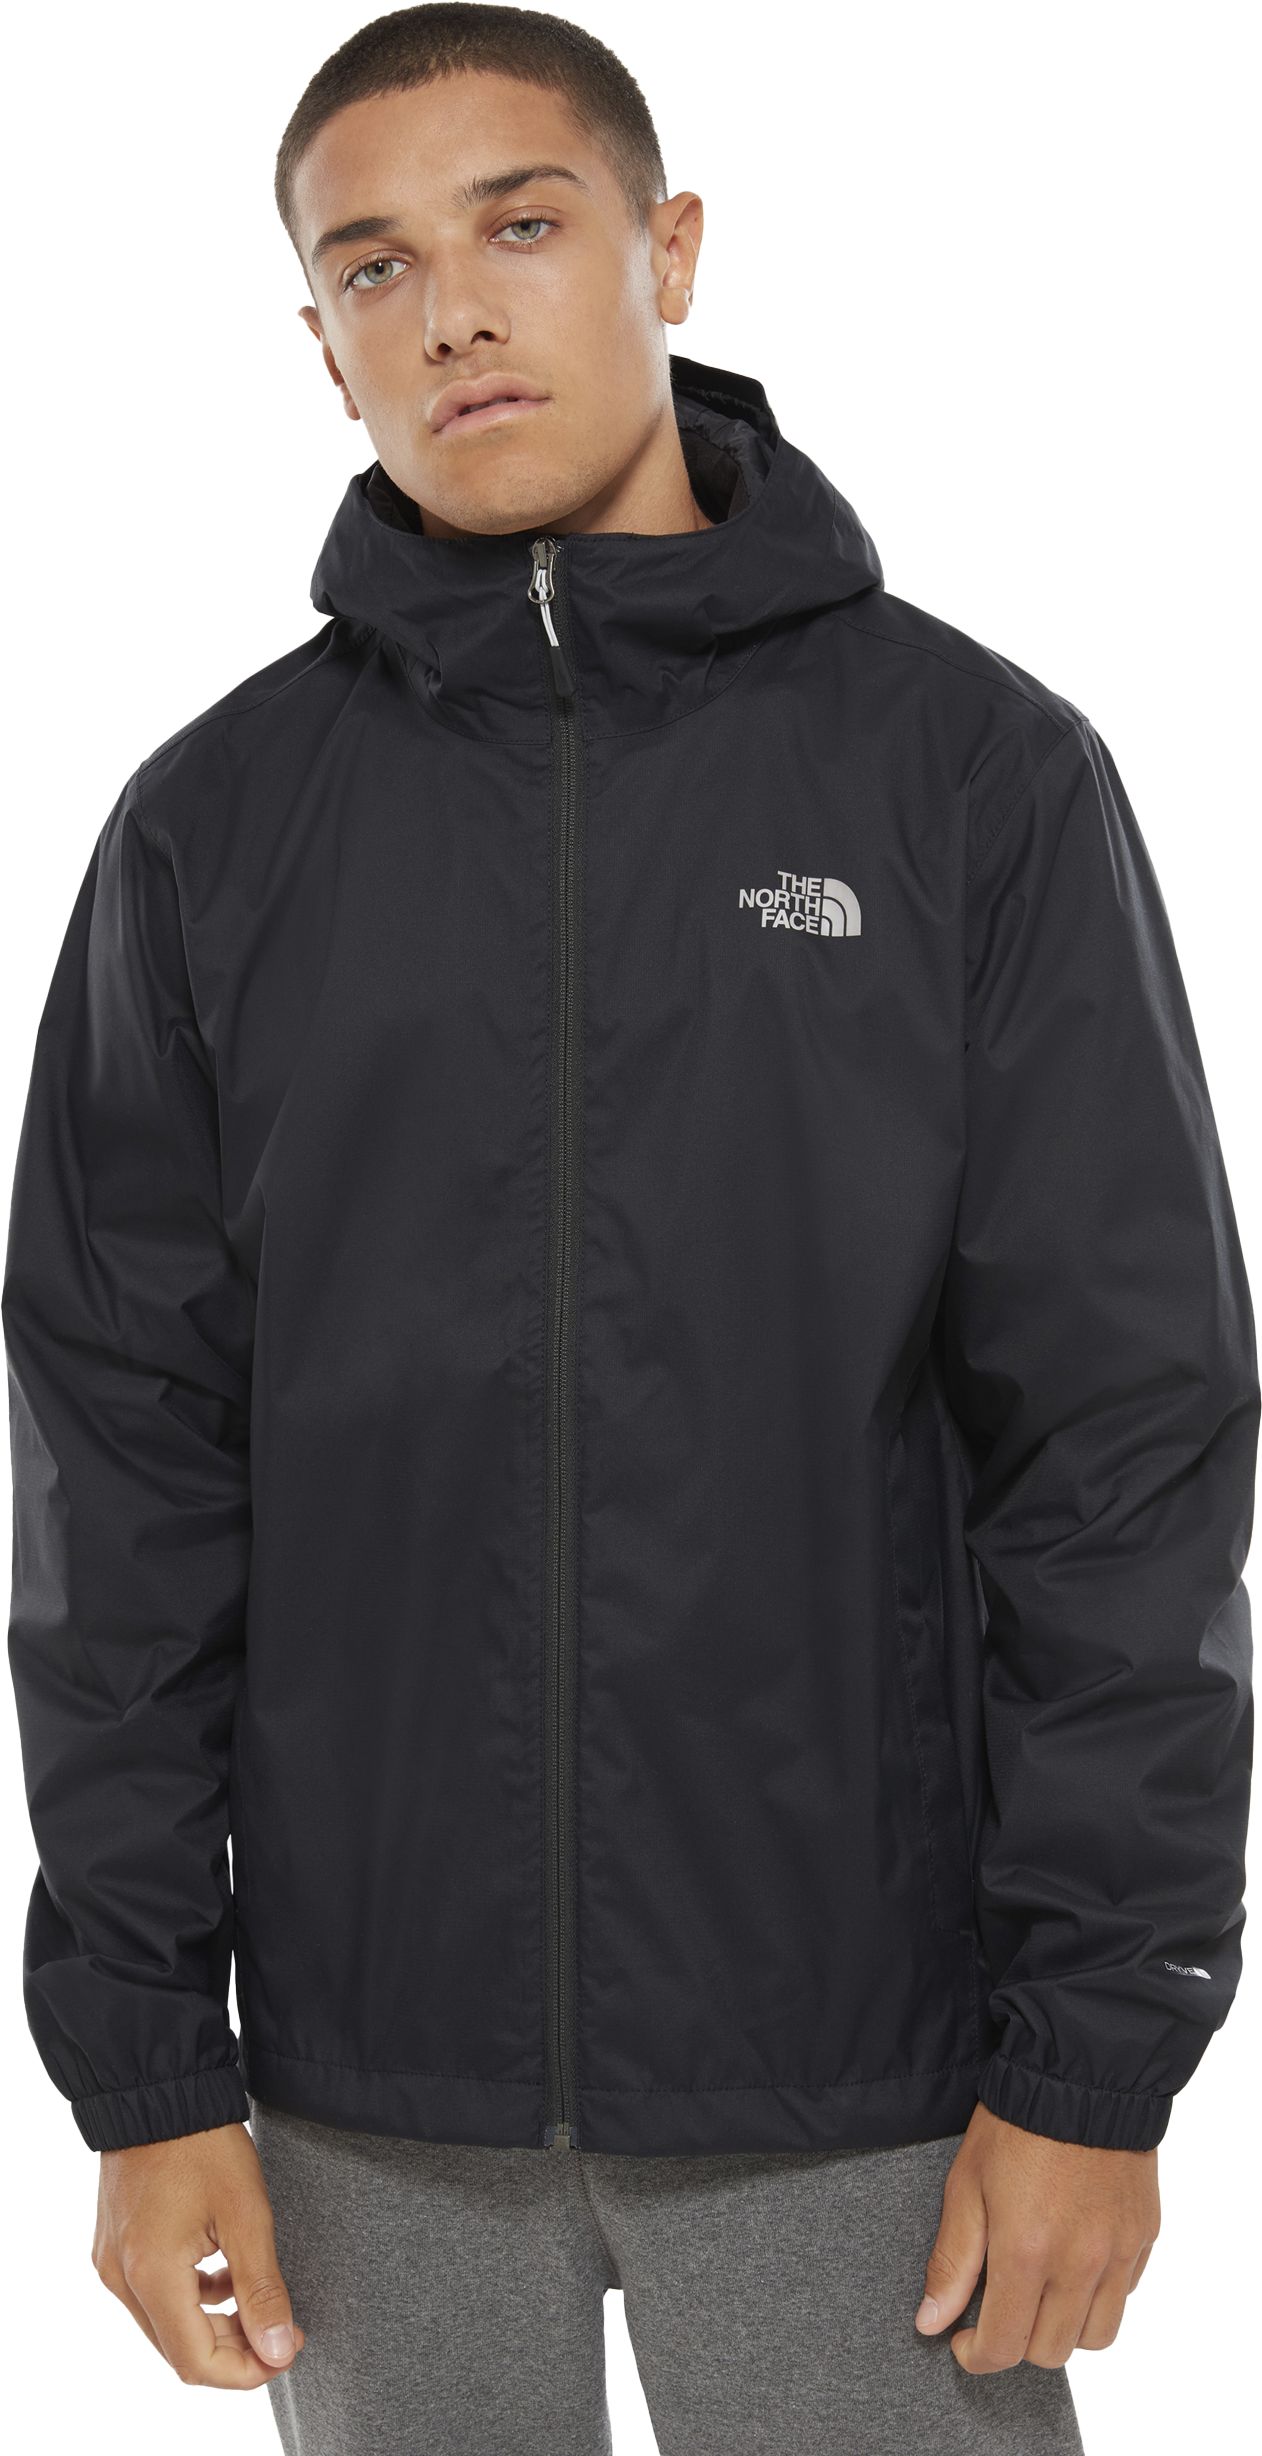 THE NORTH FACE, M QUEST JKT